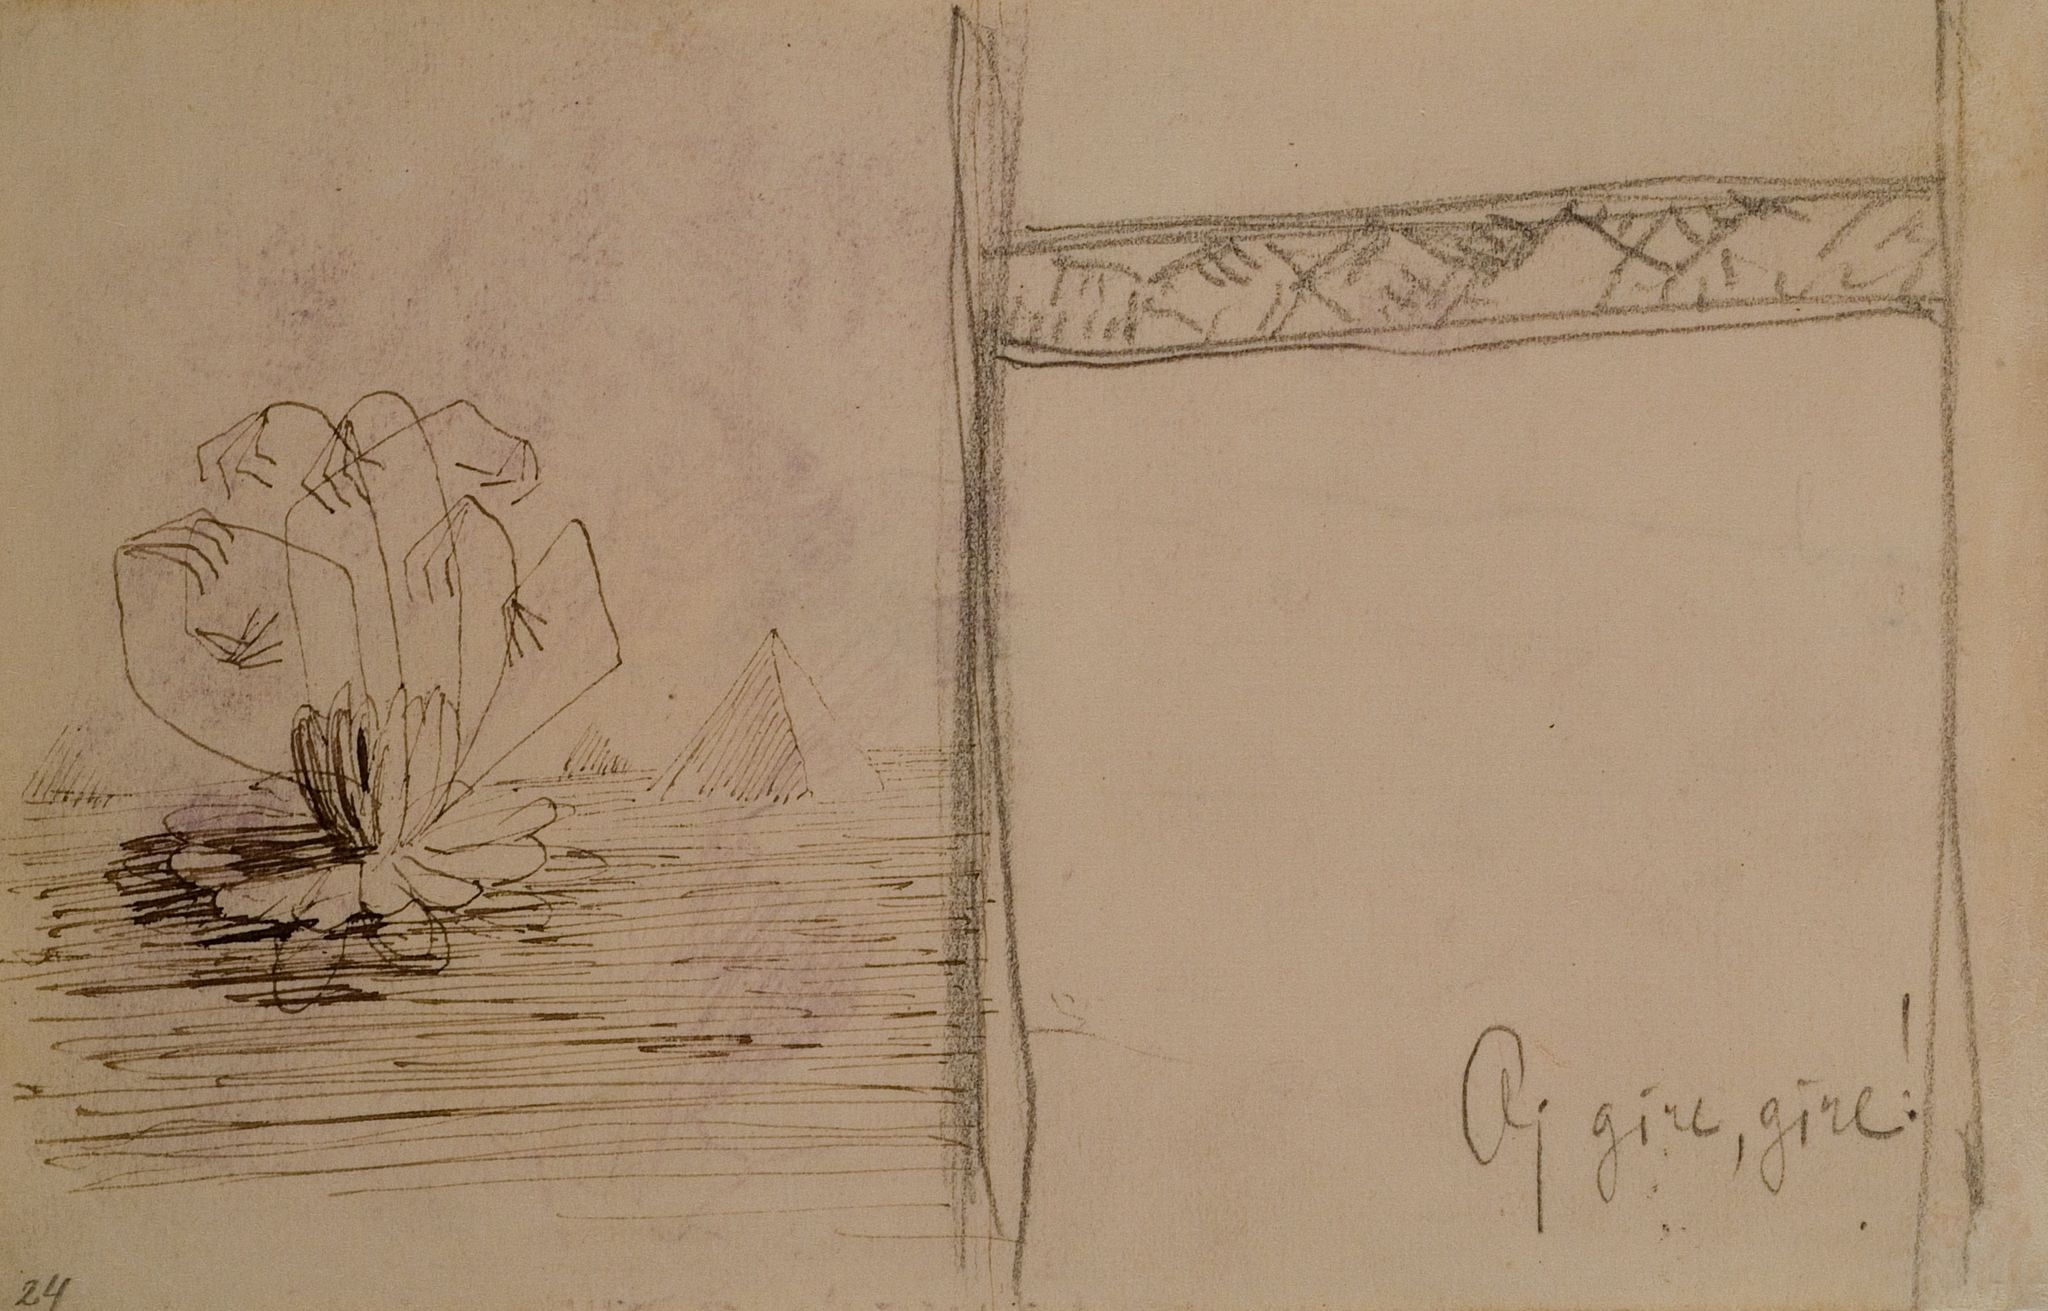 Image for: Sketches for composition and the Cover of Music "Oi giria giria" (Oh, Woods Woods)